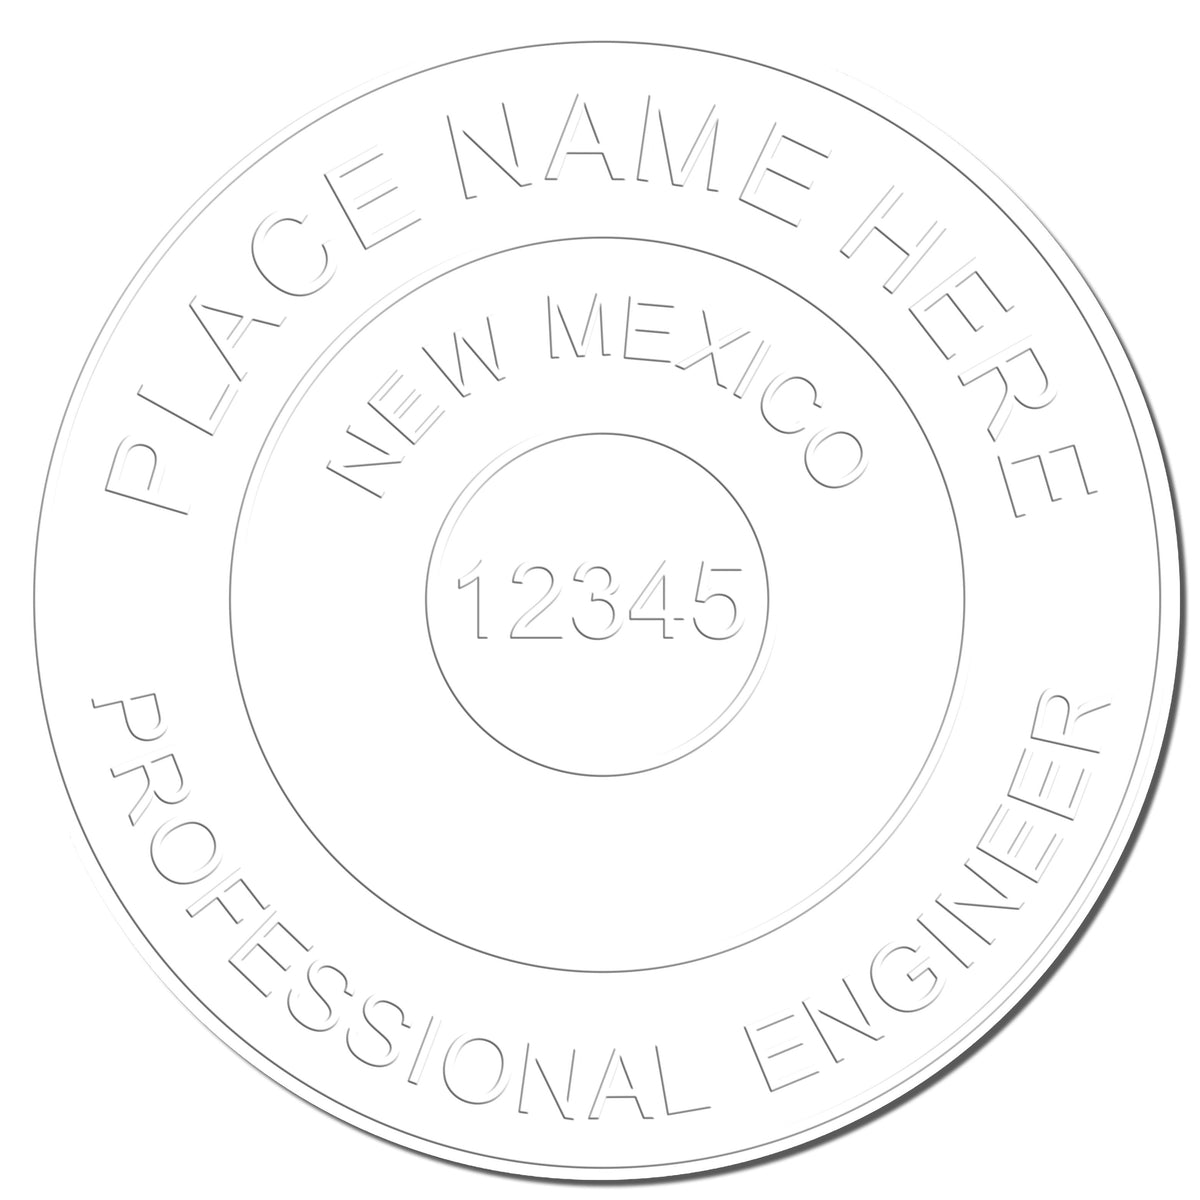 The Soft New Mexico Professional Engineer Seal stamp impression comes to life with a crisp, detailed photo on paper - showcasing true professional quality.